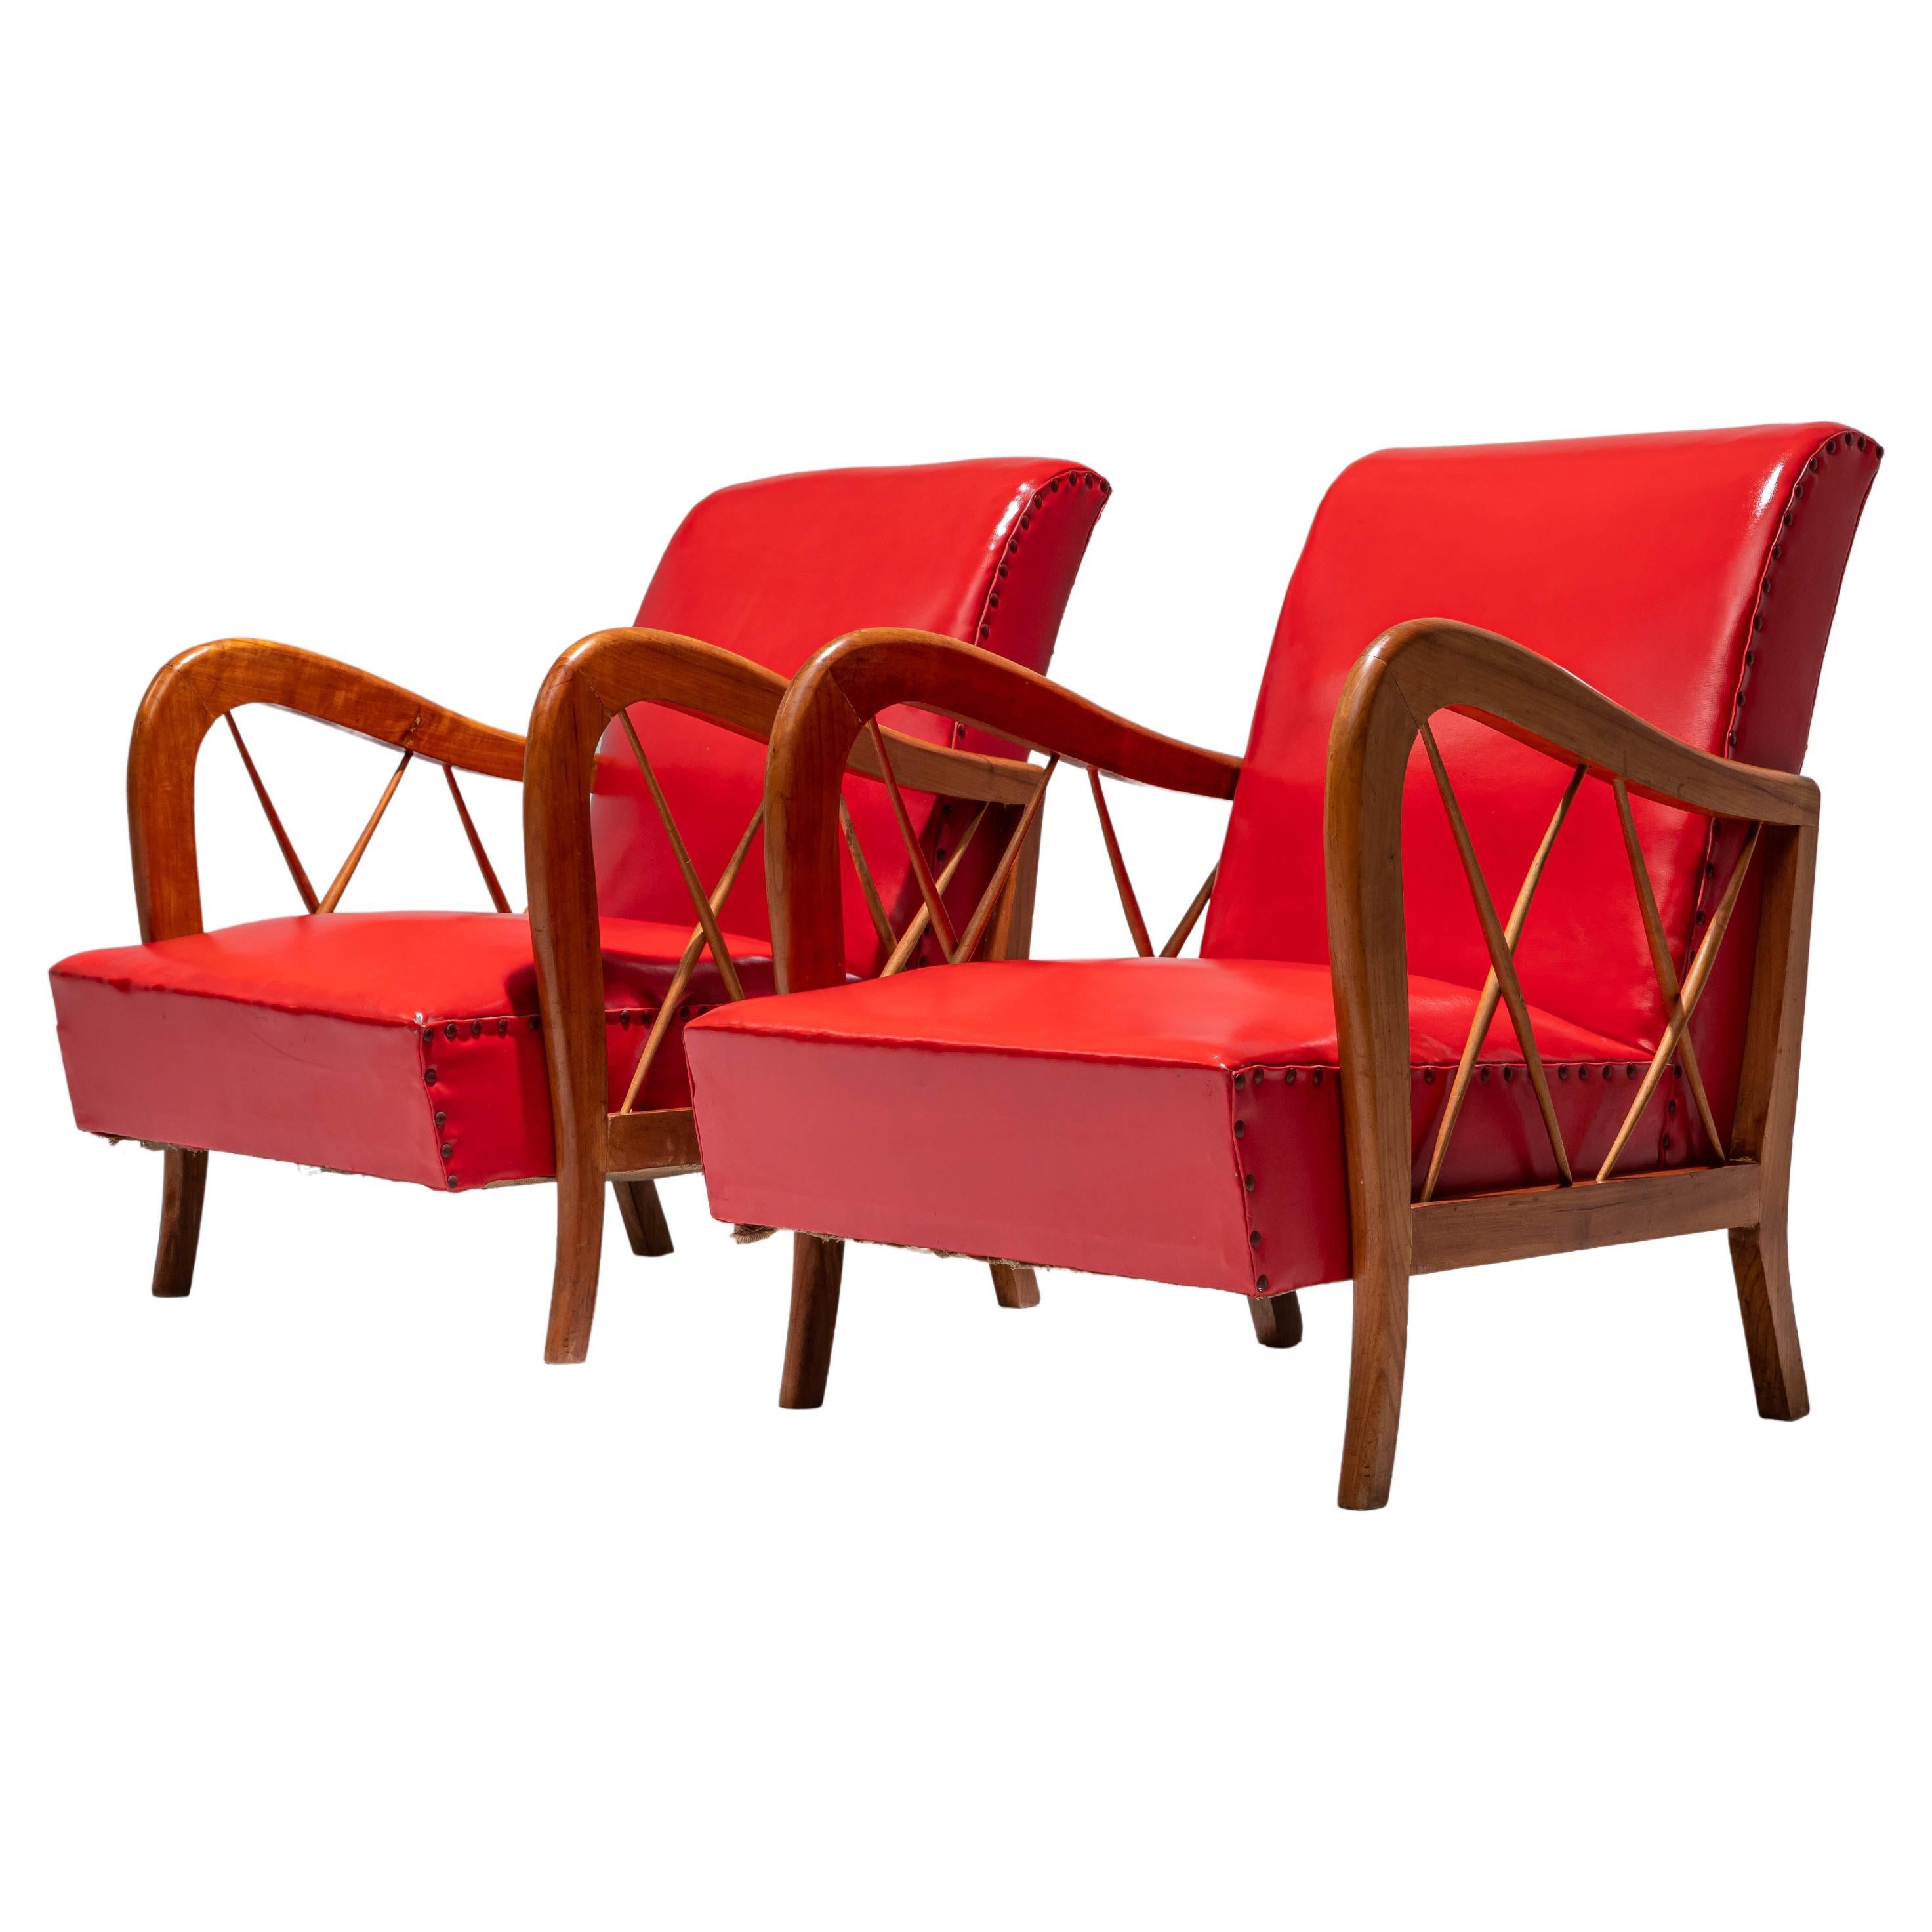 Set of 2 Arm Chairs by Paolo Buffa in Wood and Red Leatherette, Italy, 1950's